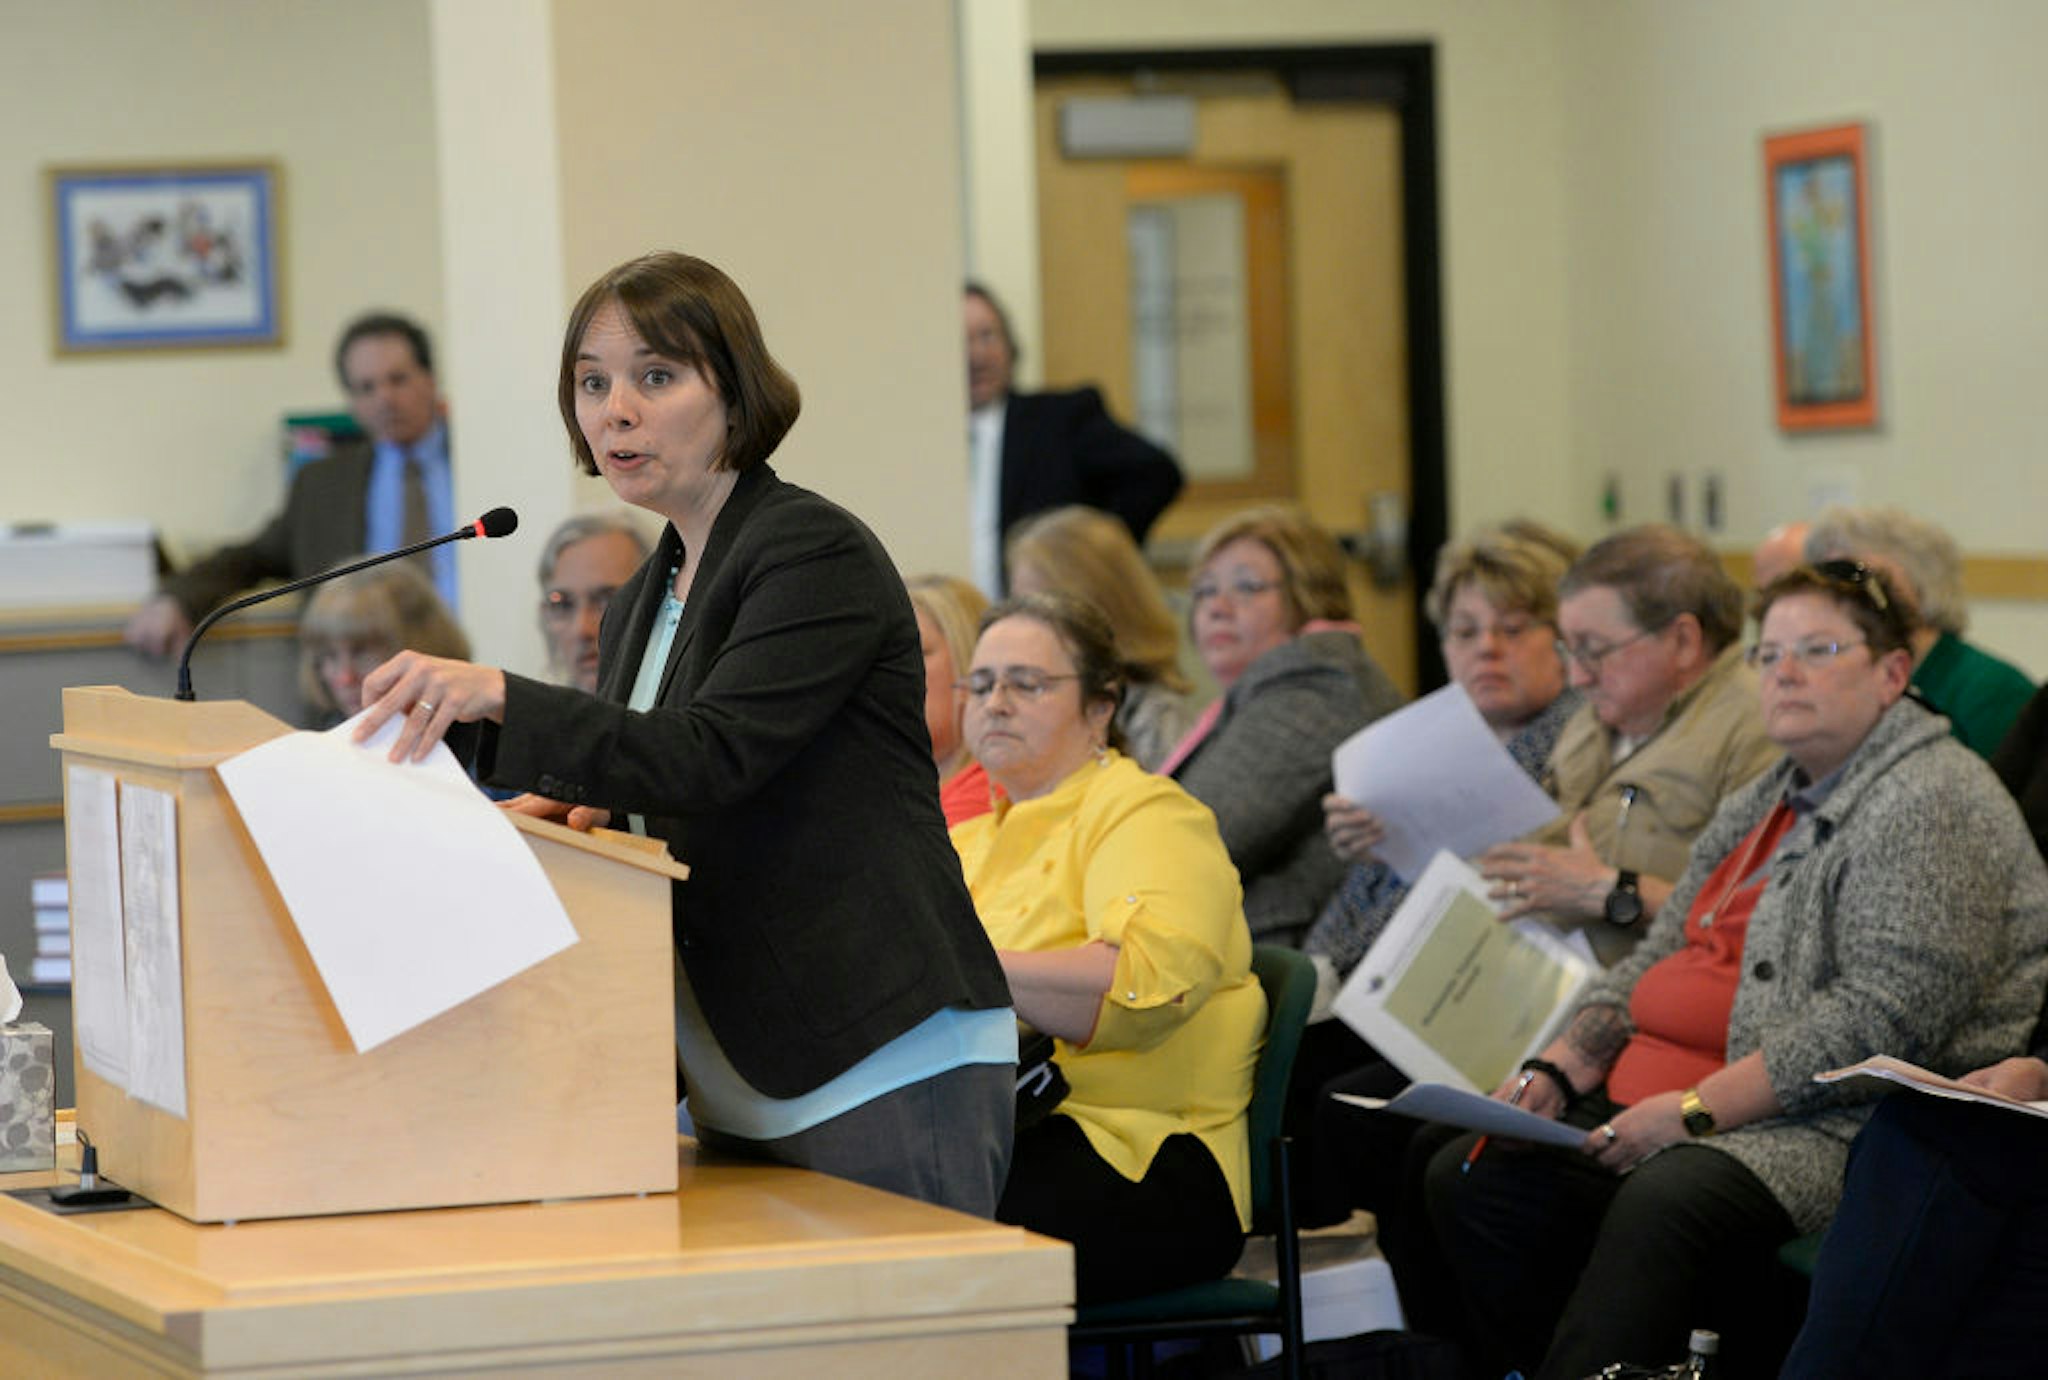 AUGUSTA, ME - MAY 2: Sen. Shenna Bellows, D-Manchester speaks at a hearing in Augusta to reverse changes to section 17 that resulted in many clients losing mental health services Tuesday, May 2, 2017.